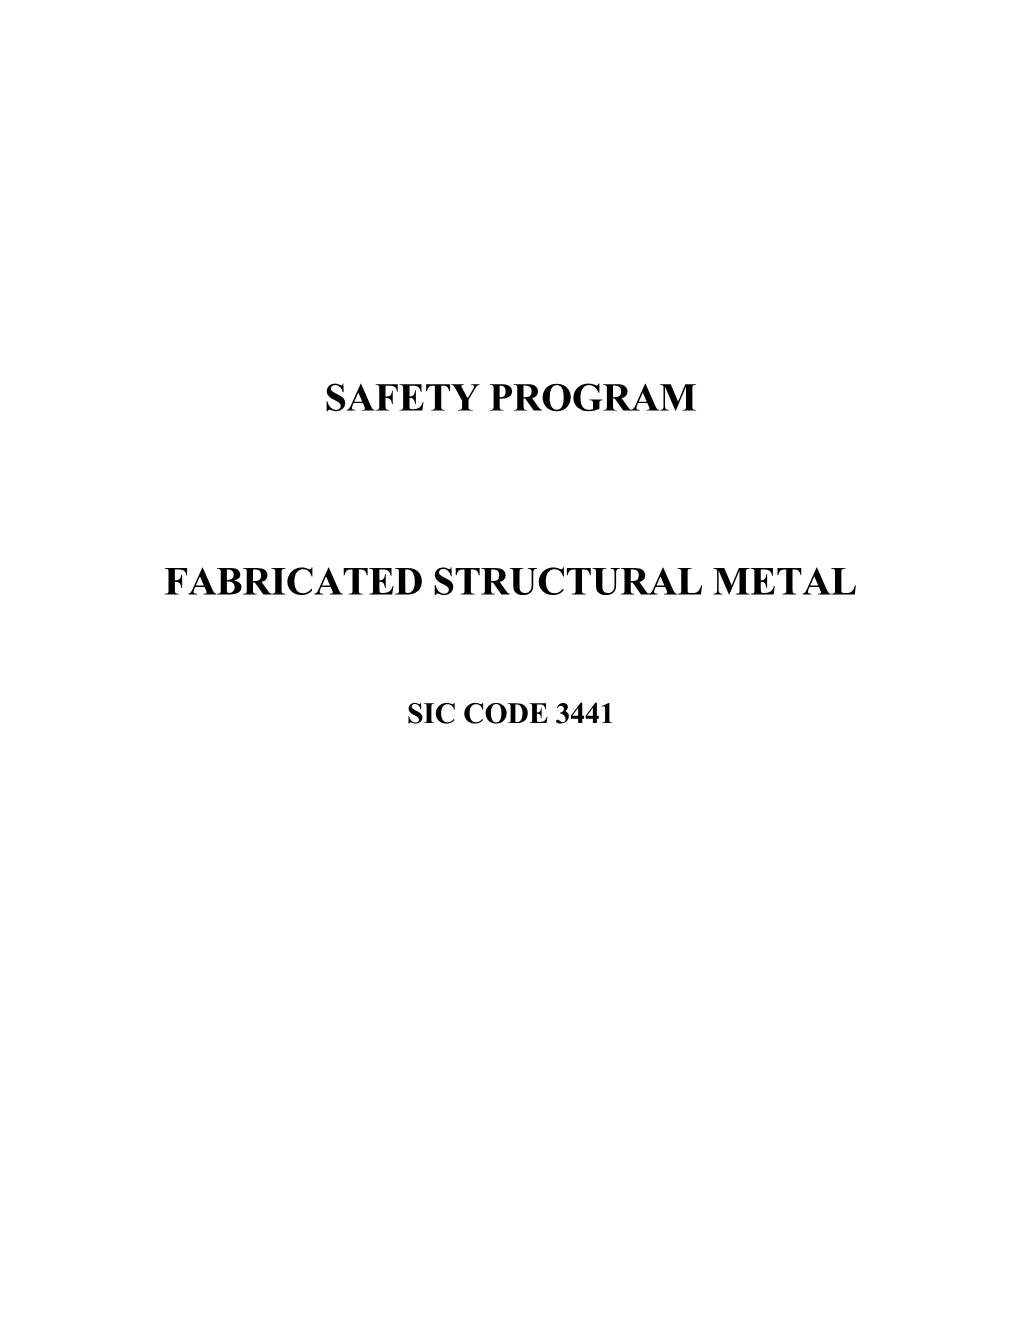 Fabricated Structural Metal Safety Program